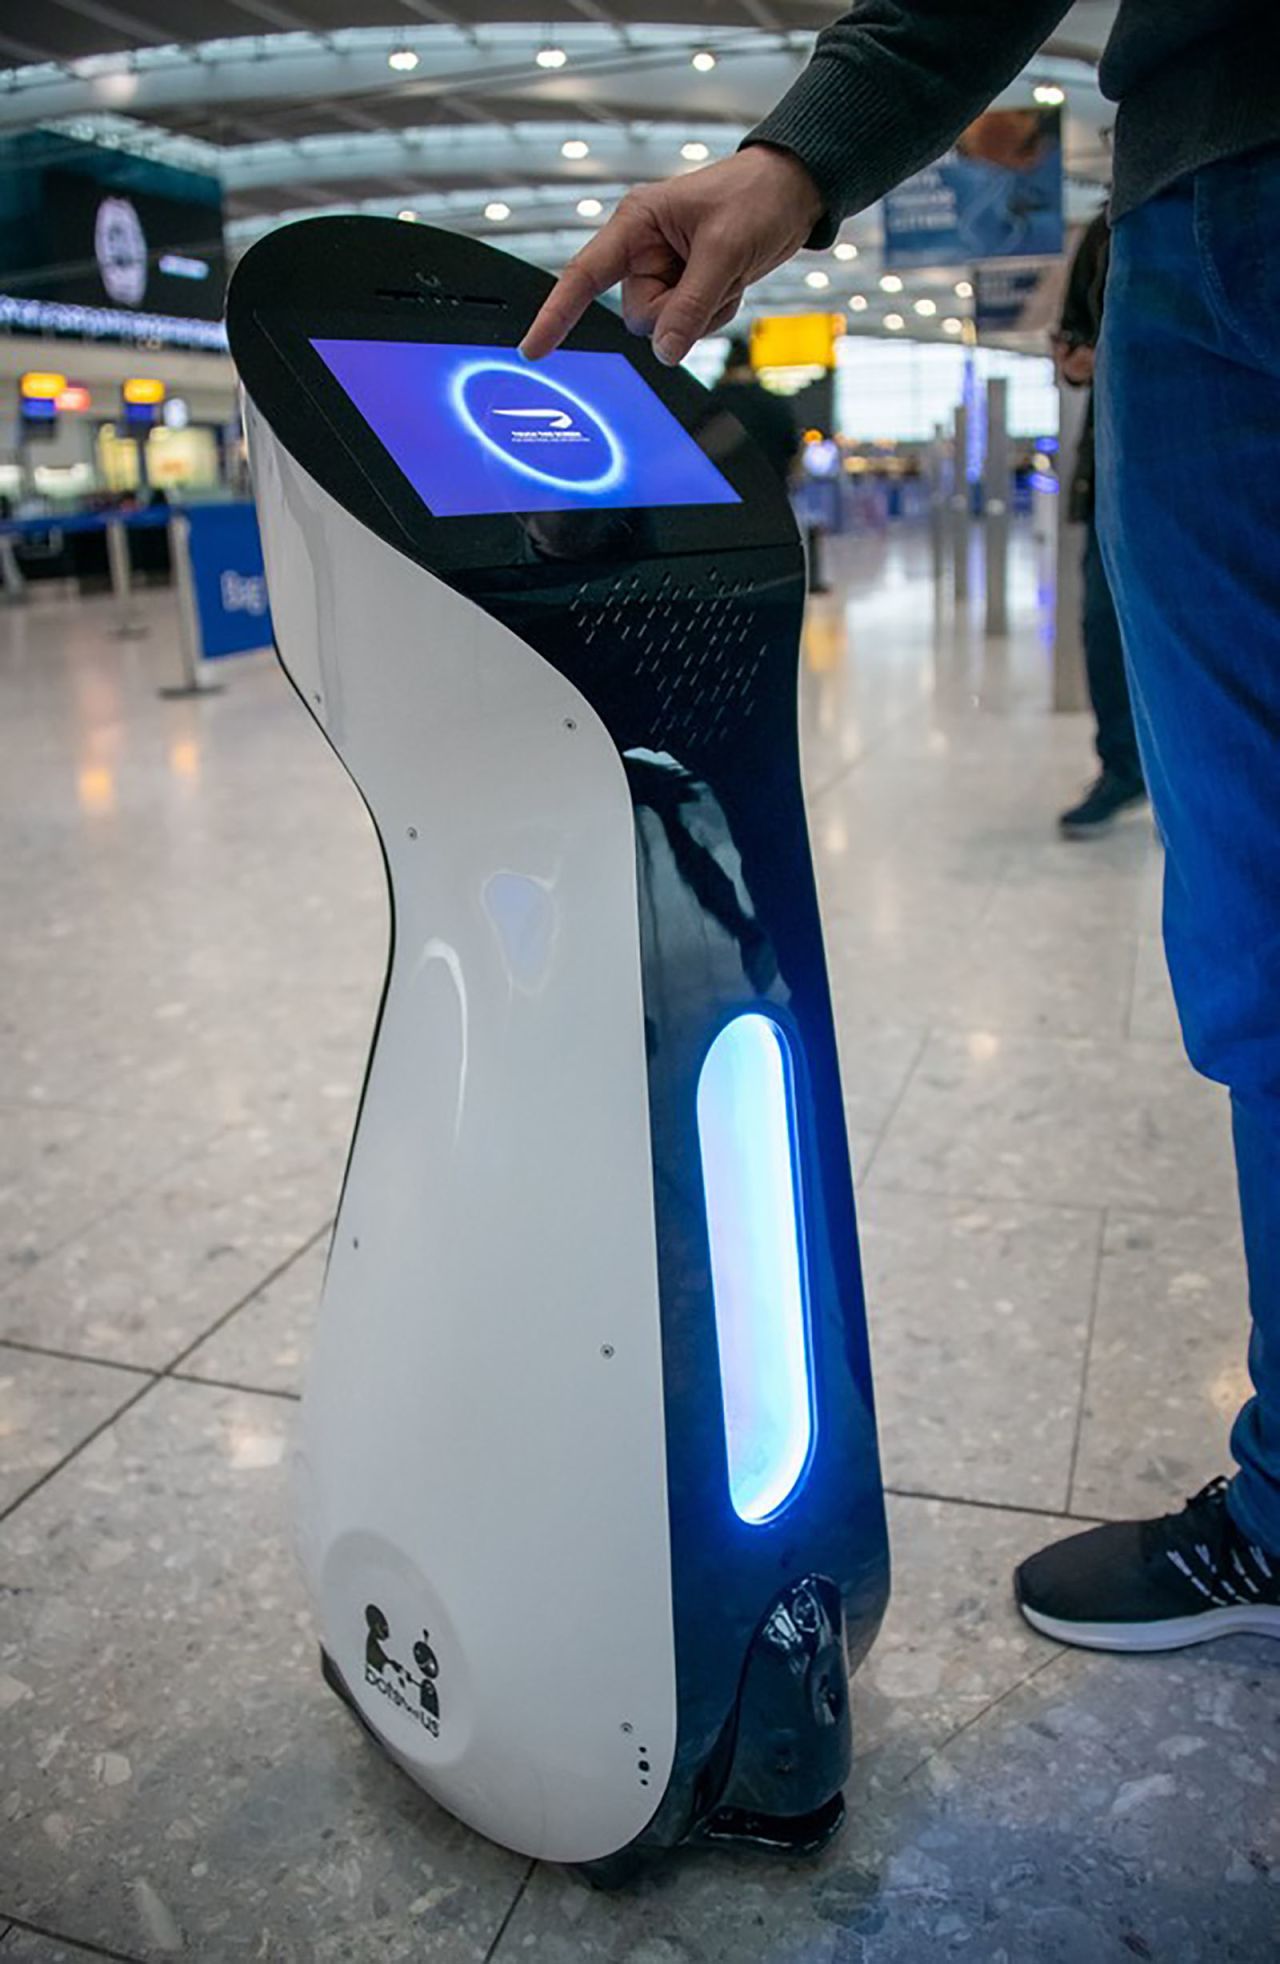 <a href="https://edition.cnn.com/travel/article/airports-future-technology/index.html" target="_blank">British Airways is trialing autonomous robots</a> at Heathrow Terminal 5. The robots, developed by technology company BotsAndUs, can interact with passengers in multiple languages and have the ability to answer thousands of questions including those related to real-time flight information. Thanks to geo-location technology, they can move around the terminal and walk customers to areas such as the Special Assistance desk.